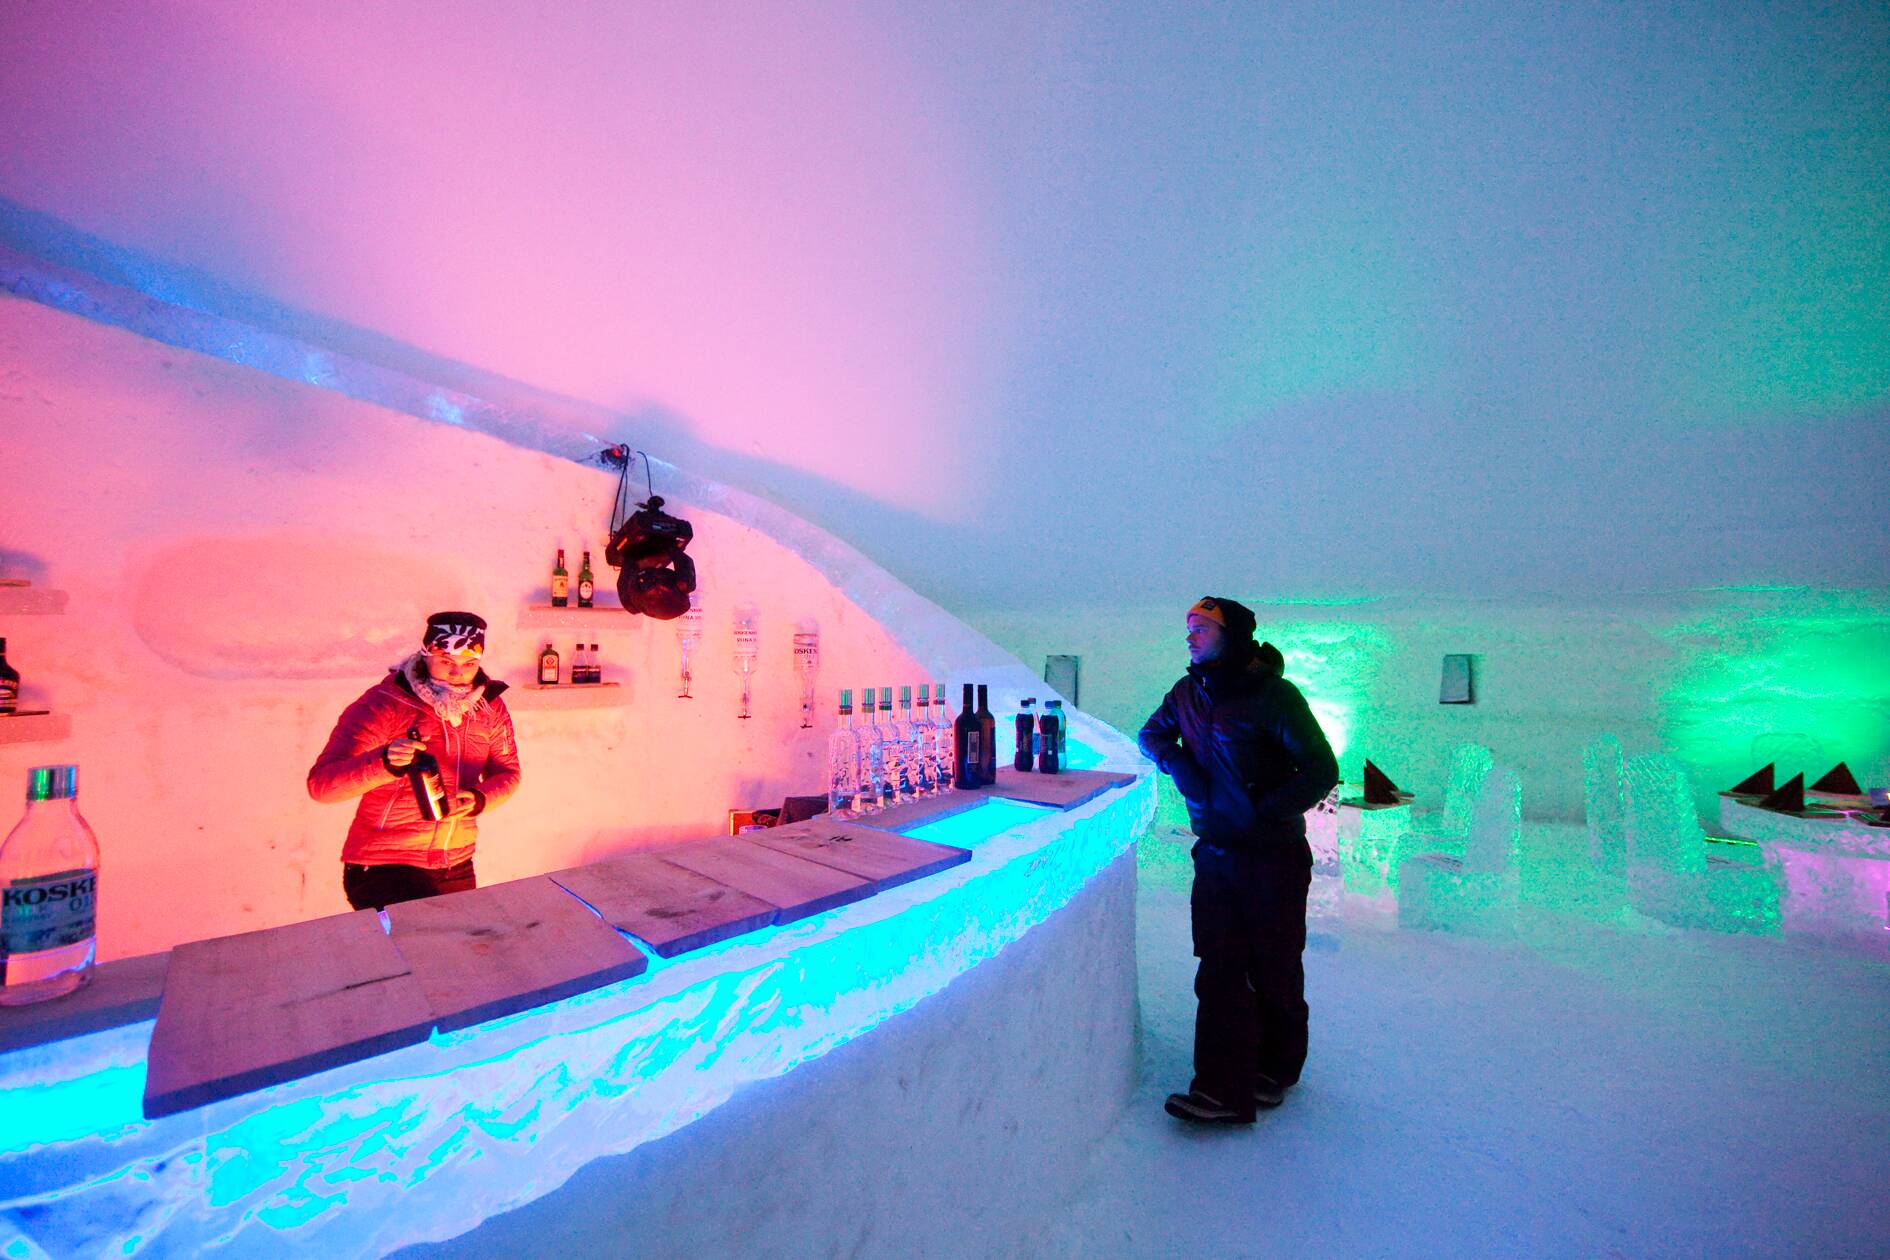 A bar made out of ice and lit with colourful lights